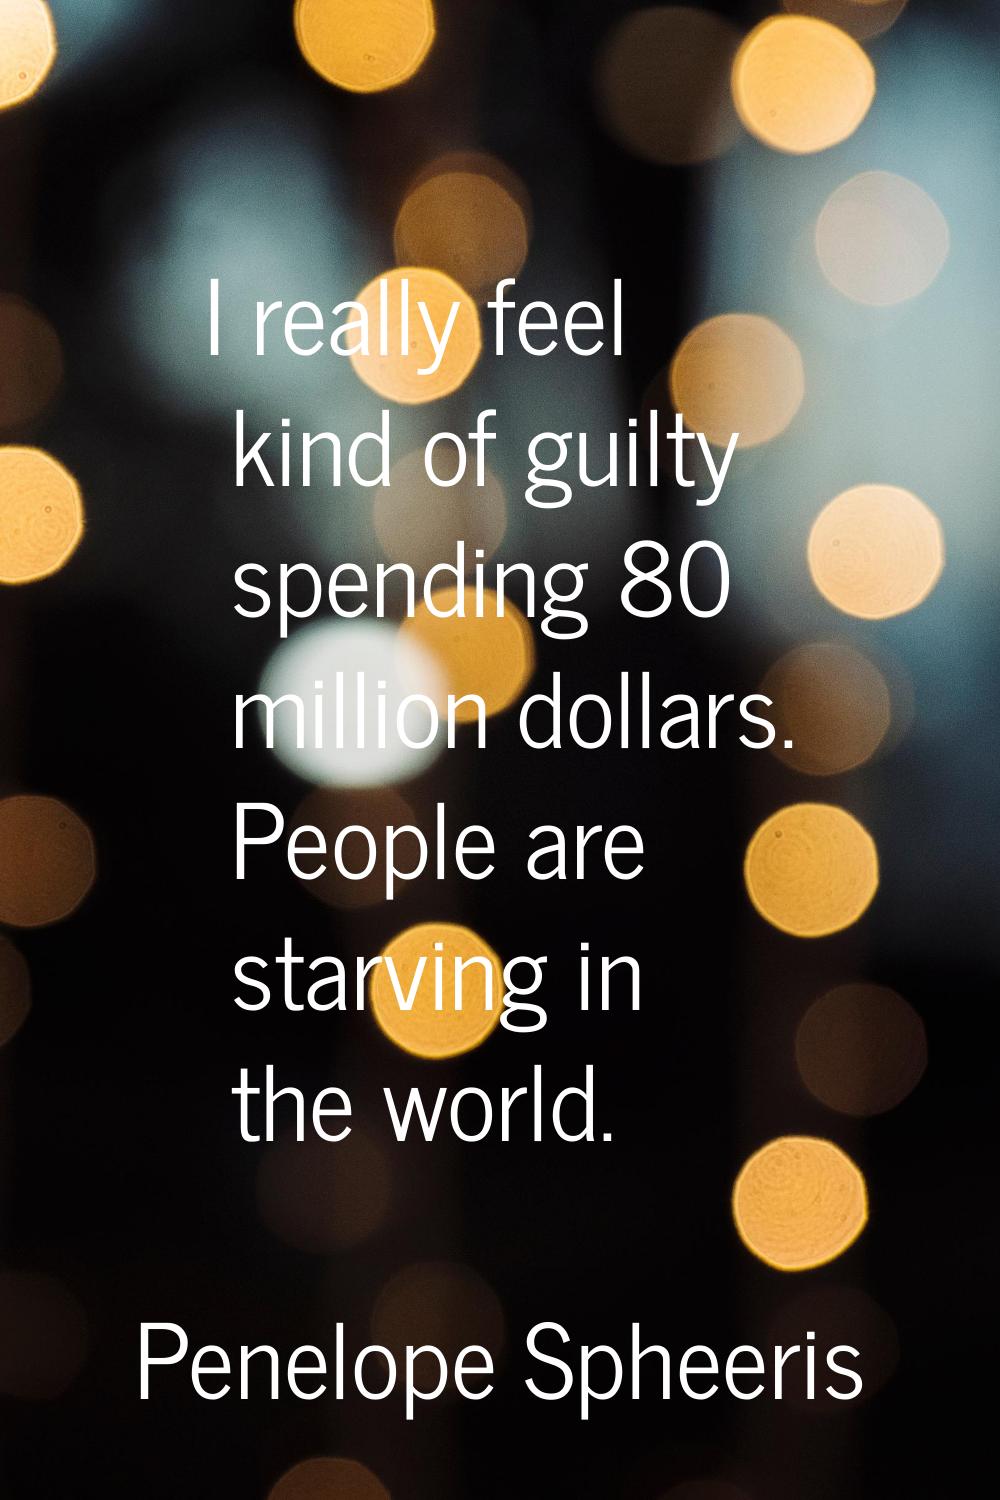 I really feel kind of guilty spending 80 million dollars. People are starving in the world.